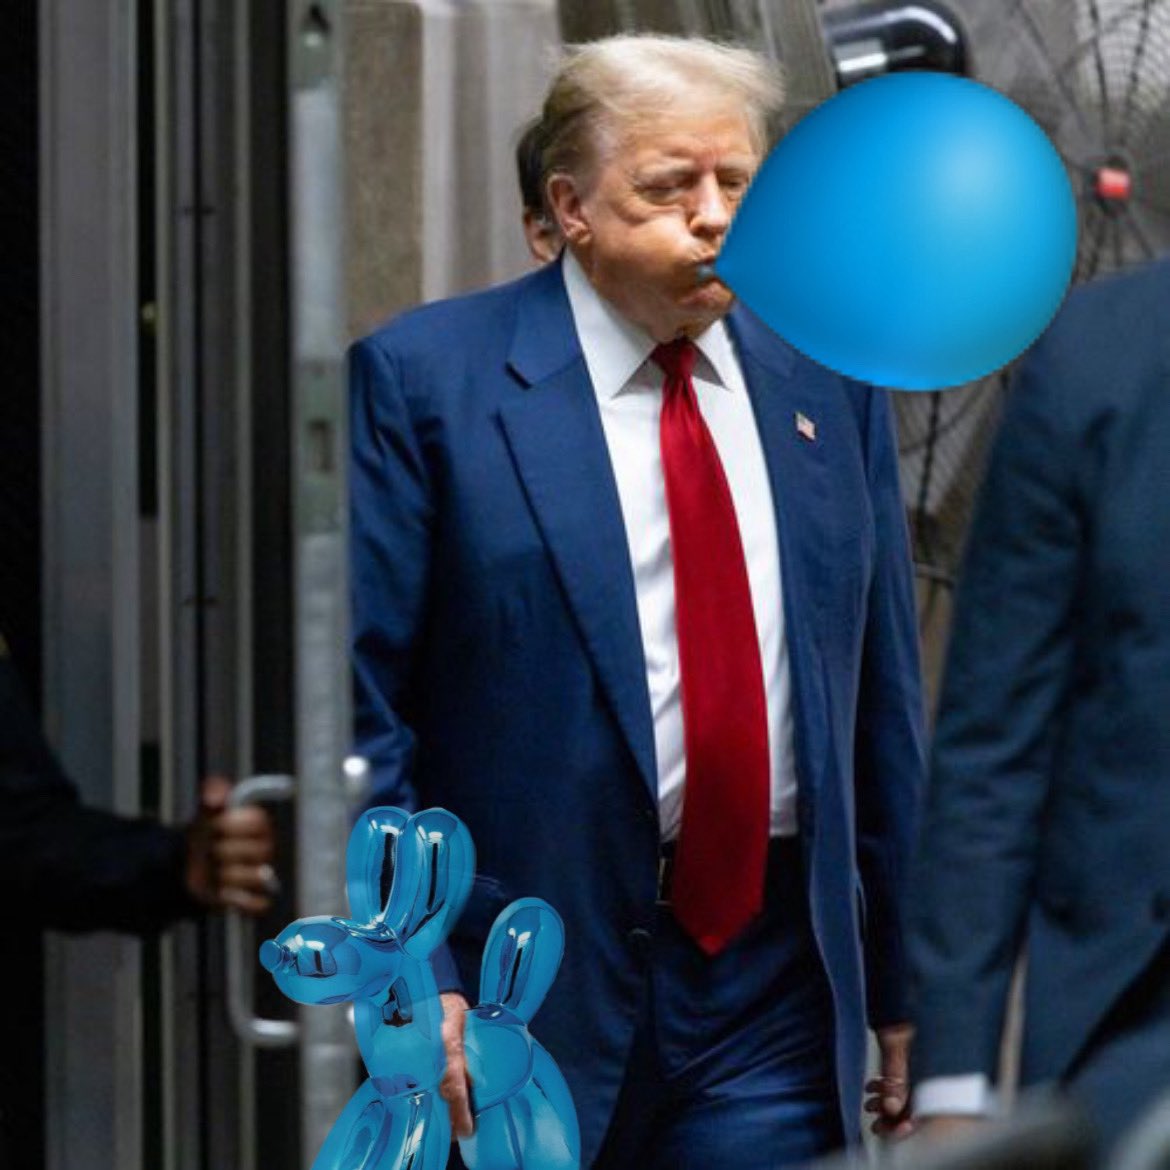 Trump entertains bored courtroom audience by making everyone a balloon animal